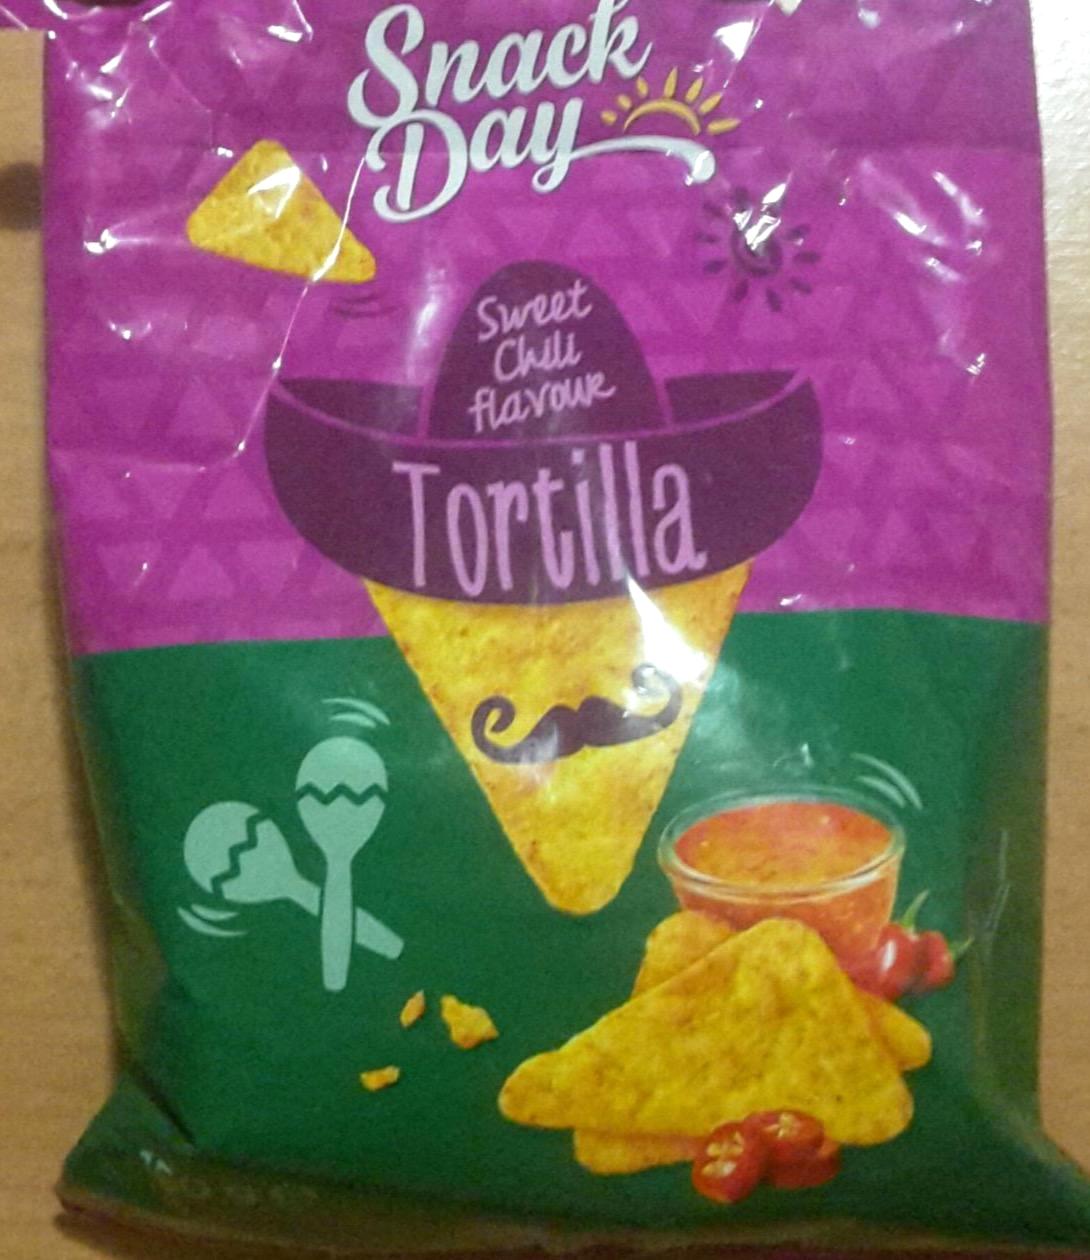 Képek - Tortilla chips sweet chili Snack day